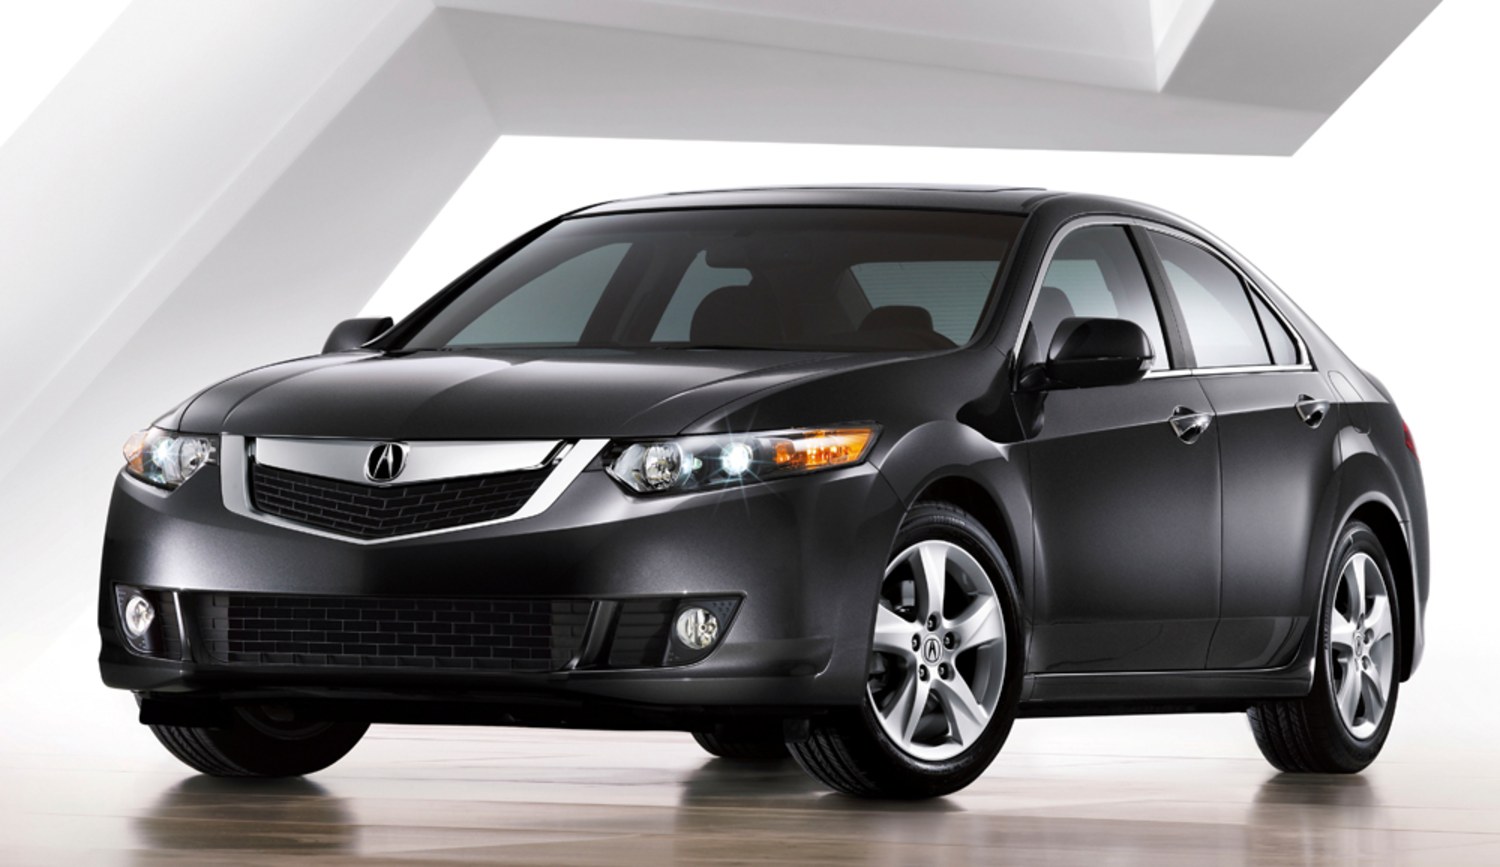 Acura to debut new TSX at New York auto show